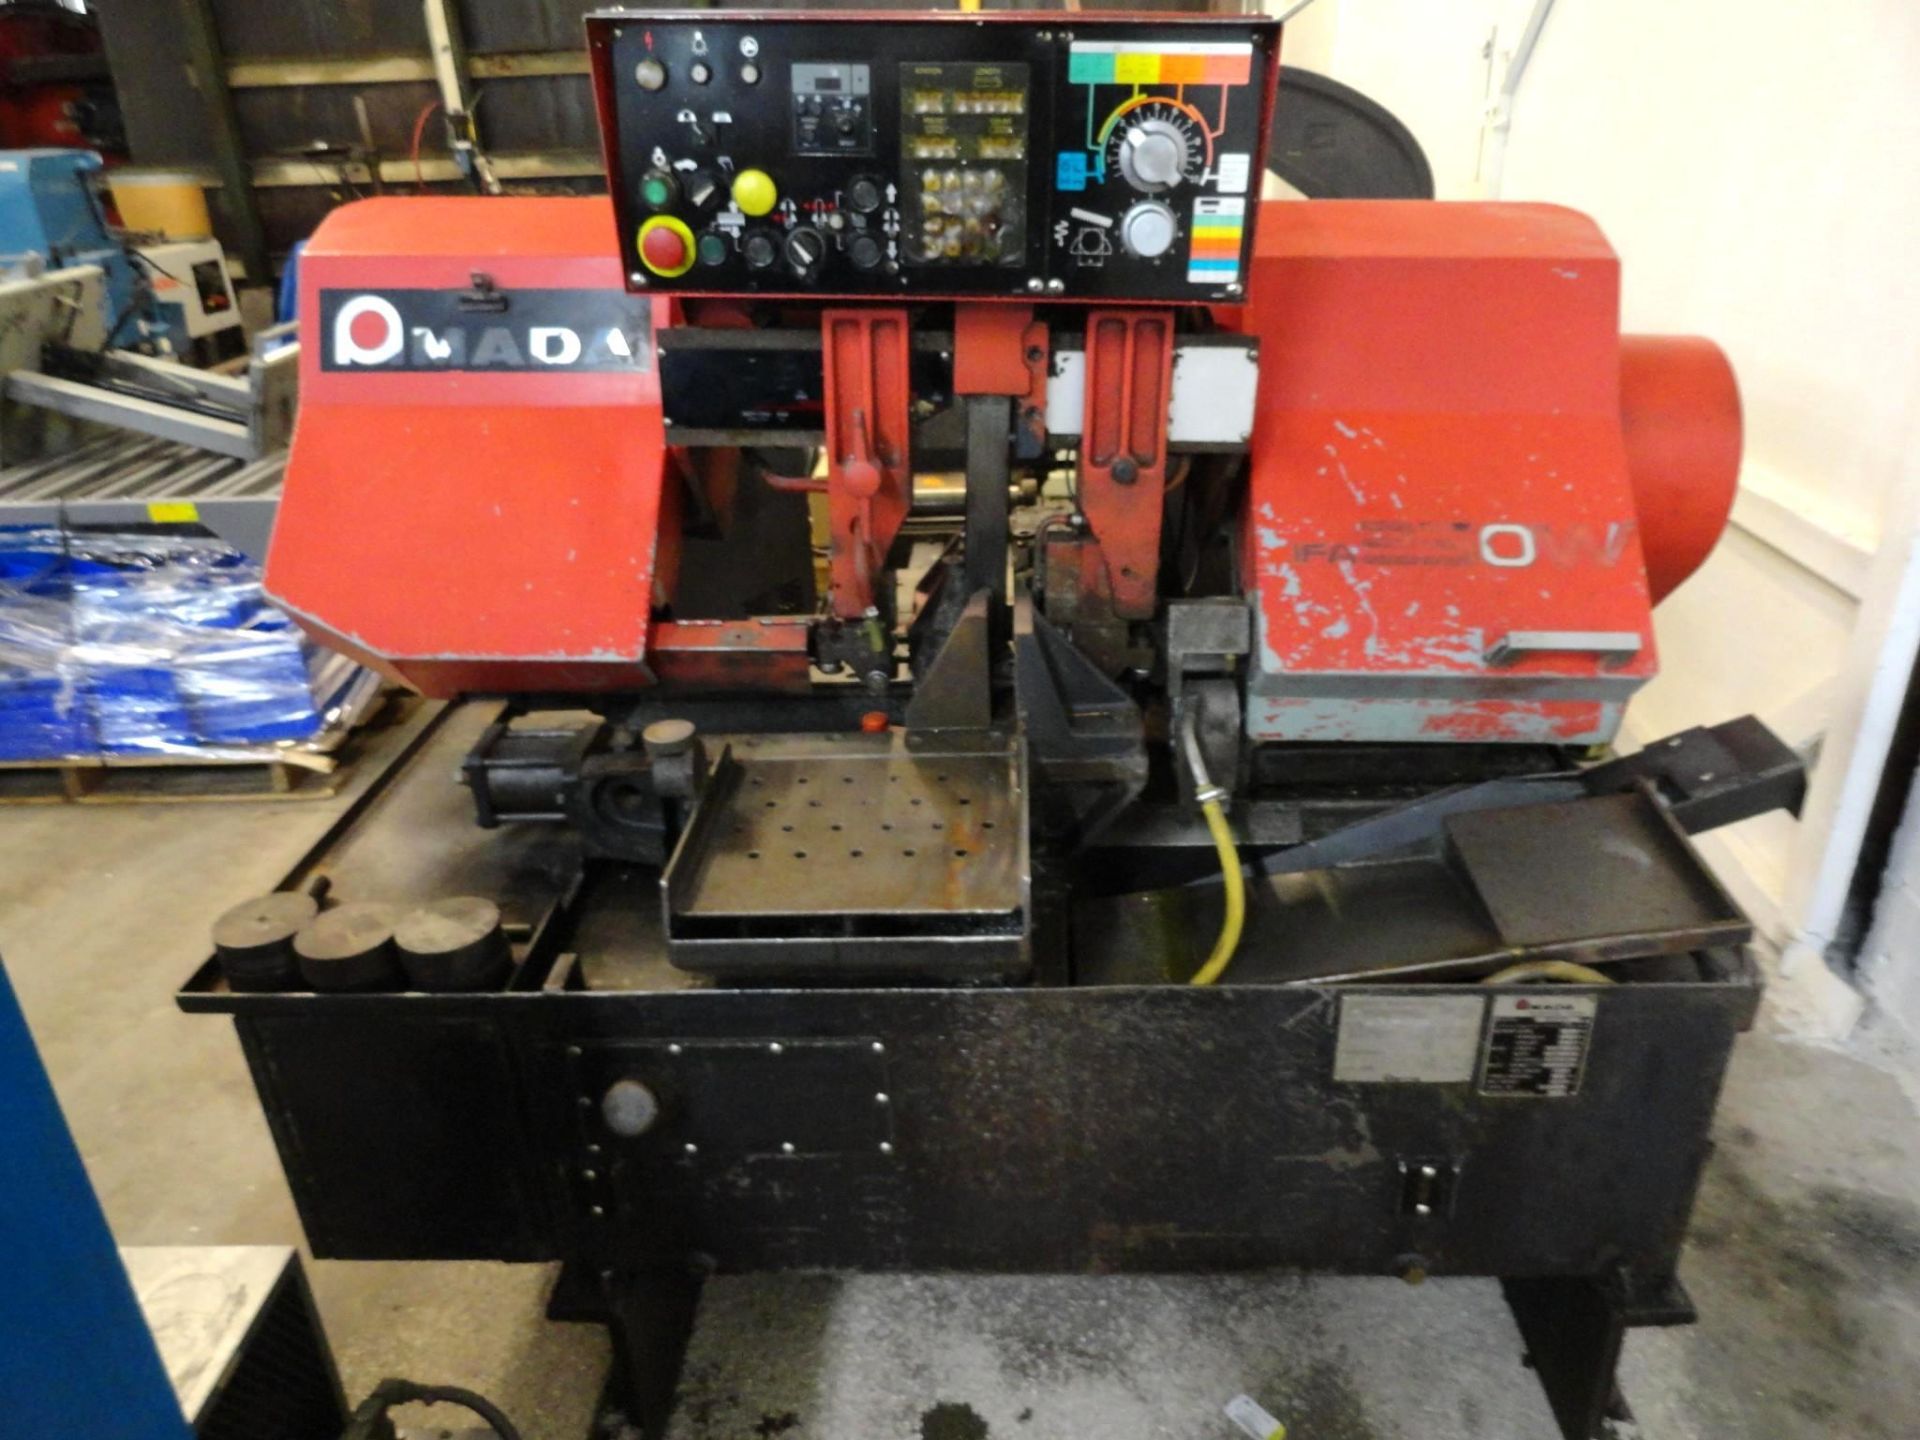 Amada HAD-250W Automatic Band Saw, Serial Number 250-20166